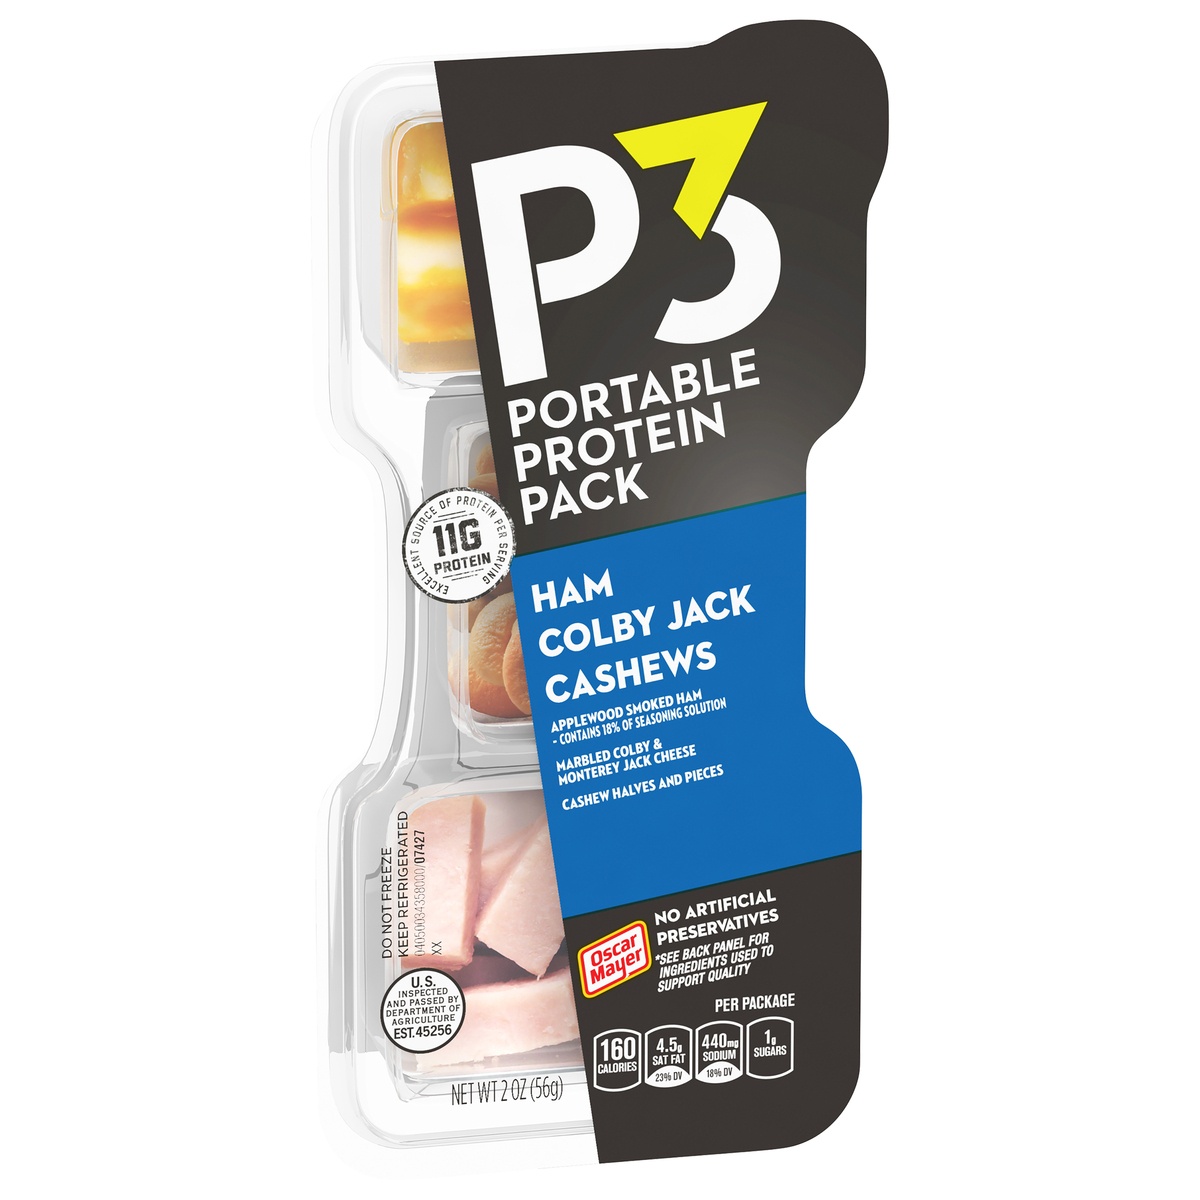 slide 2 of 10, P3 Portable Protein Snack Pack with Ham, Cashews & Colby Jack Cheese Tray, 2 oz